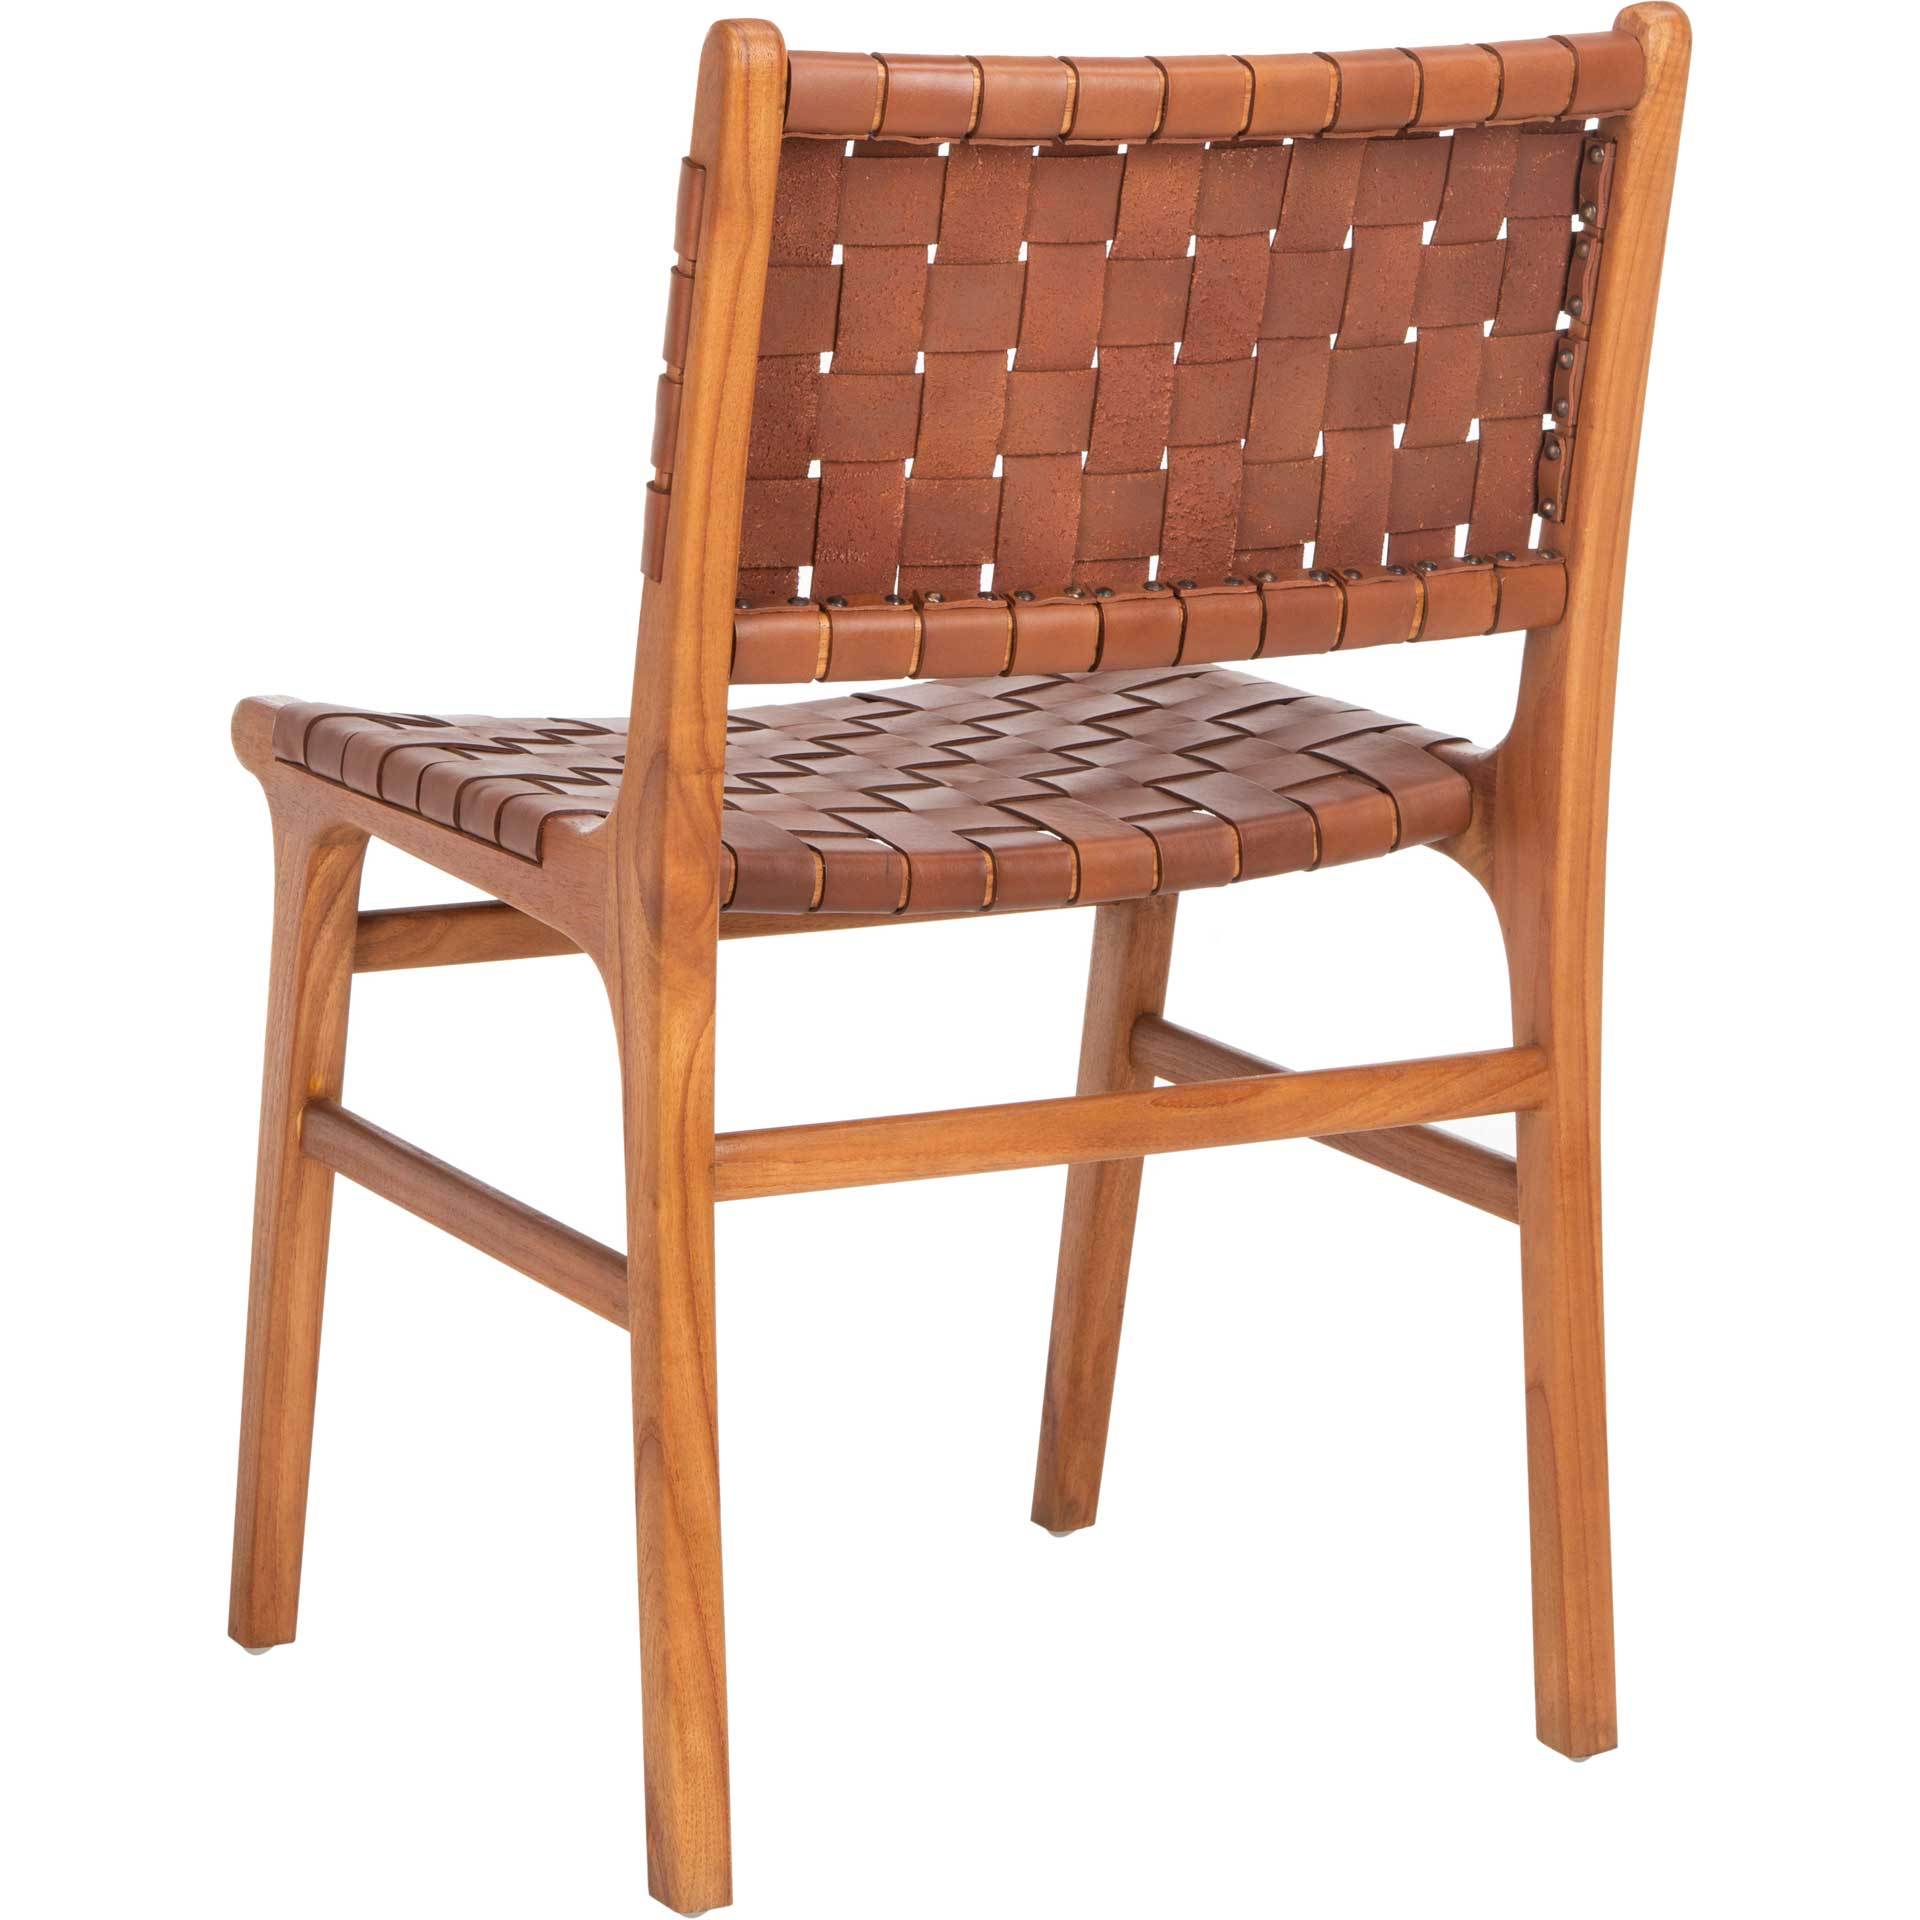 Tara Woven Leather Dining Chair (Set of 2)